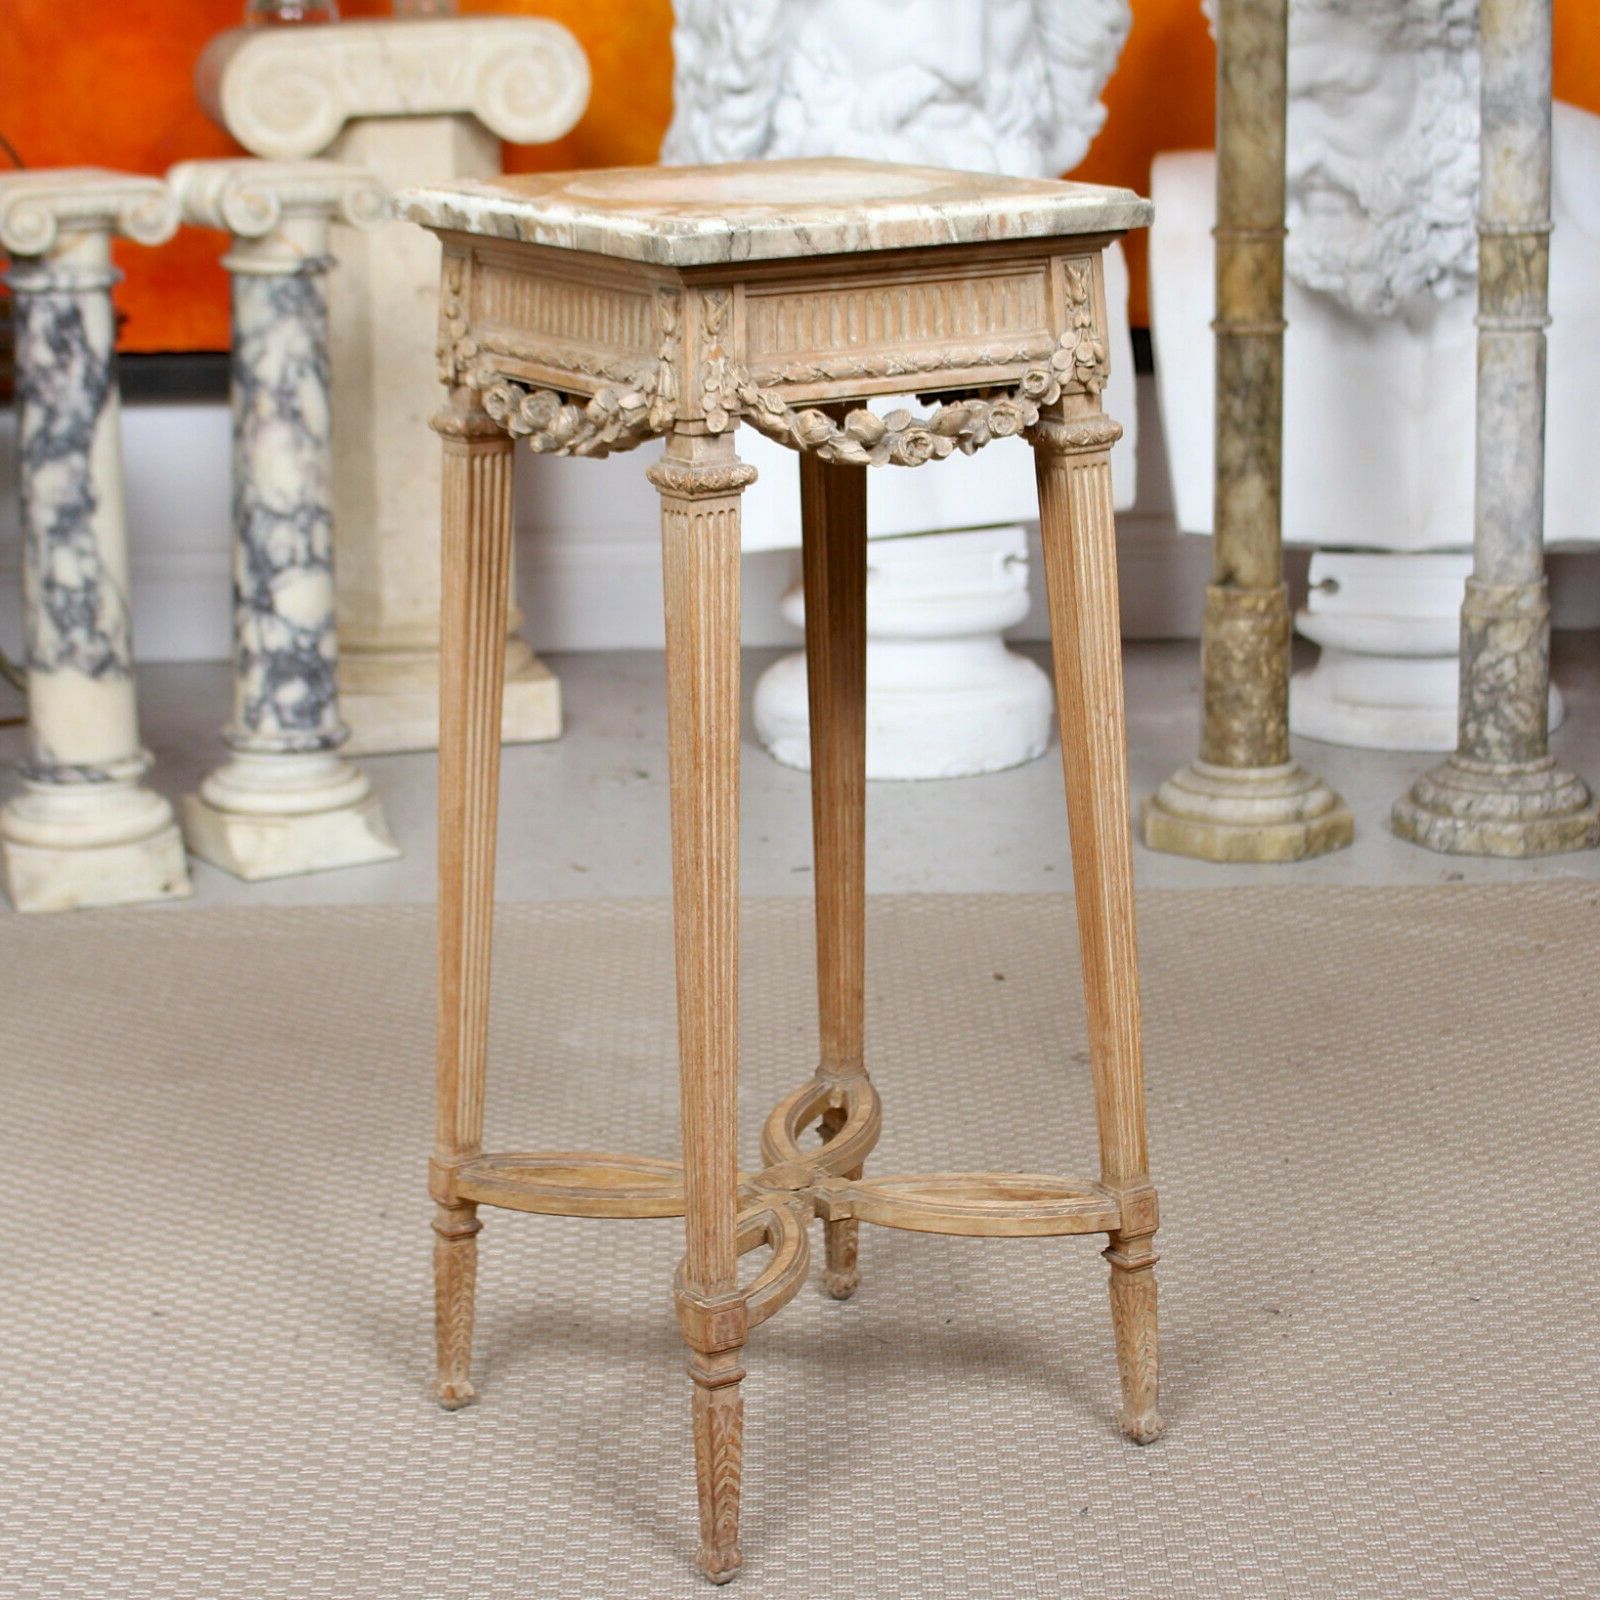 Fine Carved Limewood Marble Jardinière Plant Stand Antique (View 10 of 15)